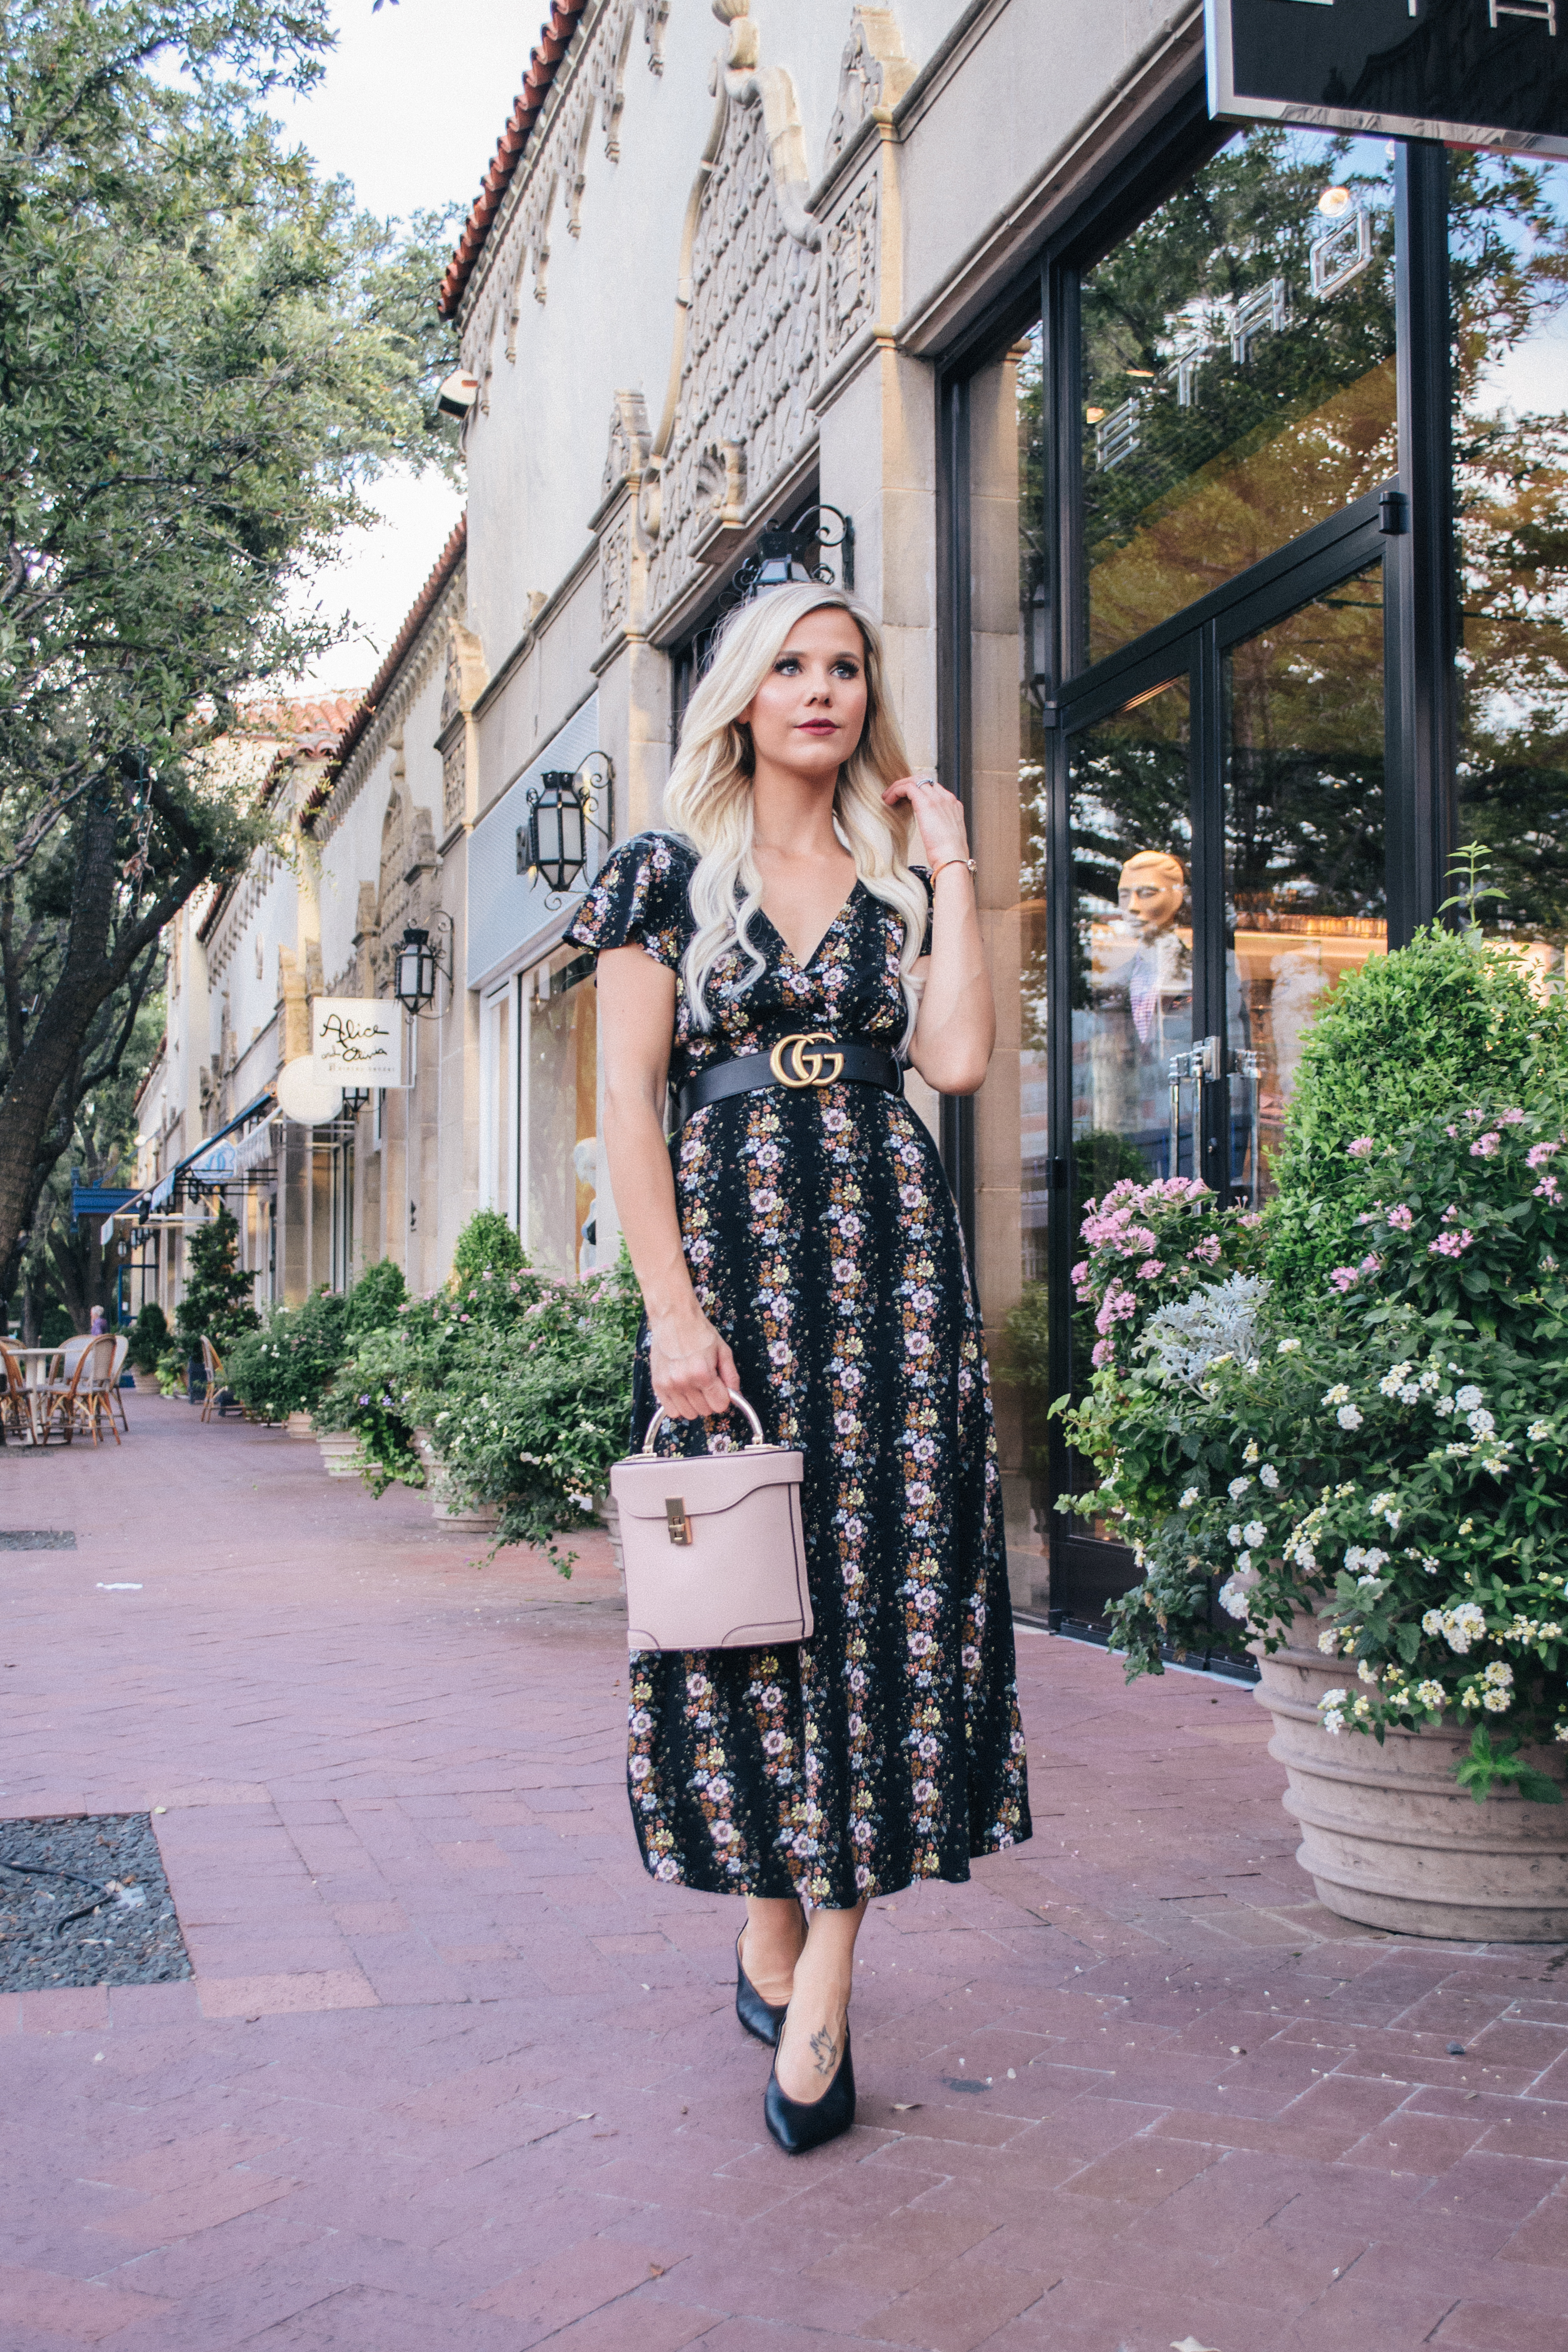 Get your wardrobe ready for fall with this dark fall floral Forever 21 maxi dress from Glam Life Living #dallasblogger #fashion #falloutfit #fallflorals 